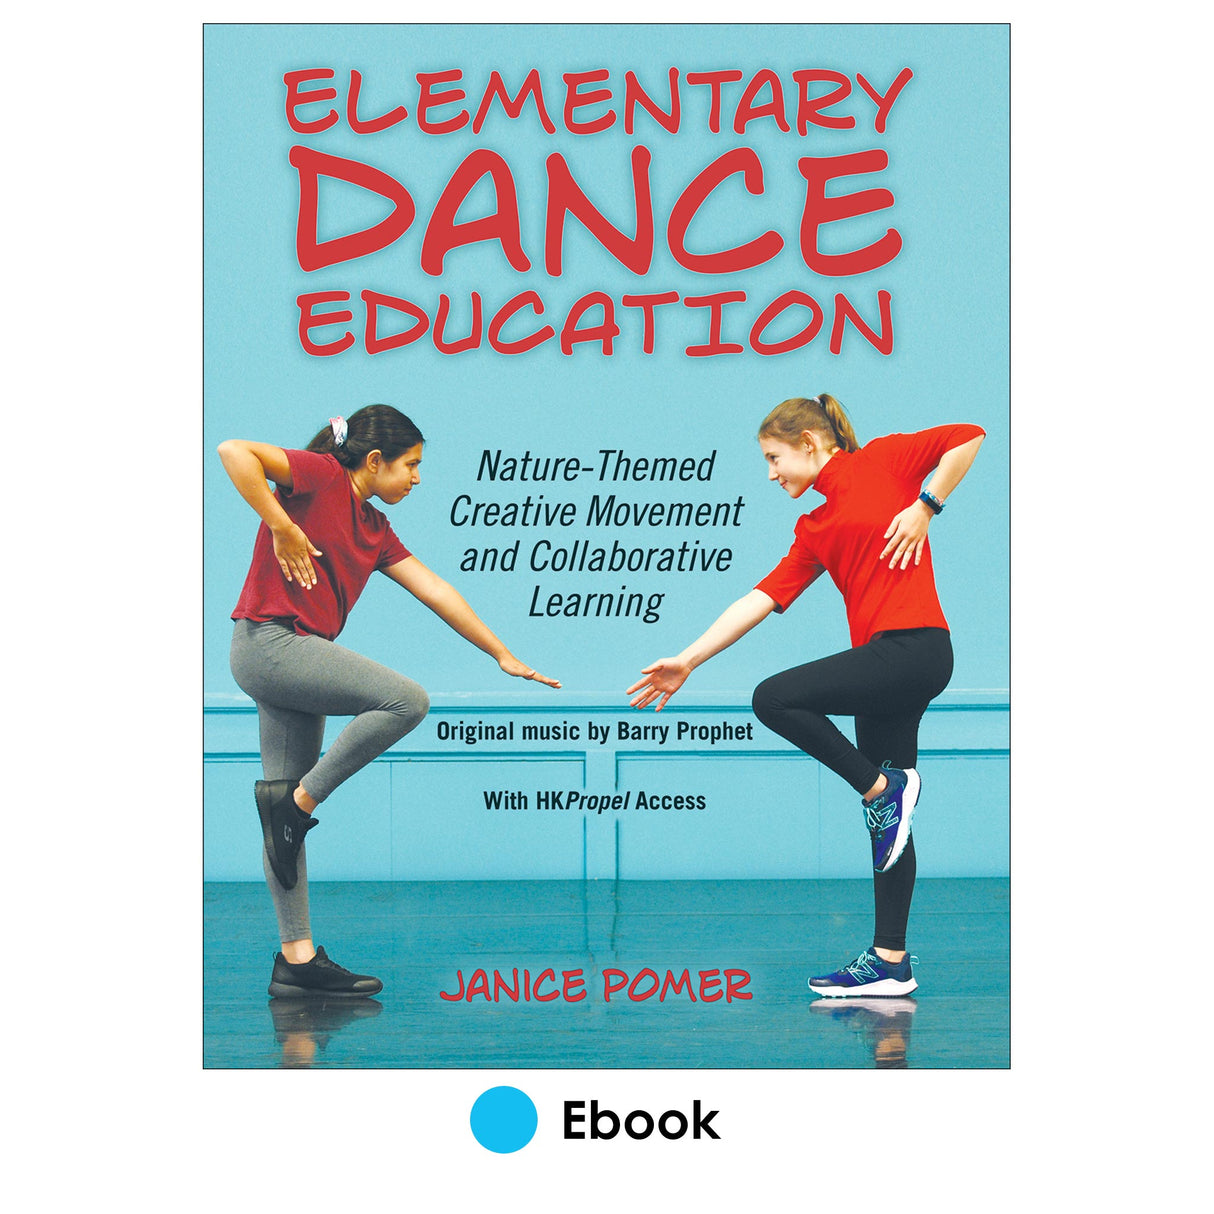 Elementary Dance Education Ebook With HKPropel Access